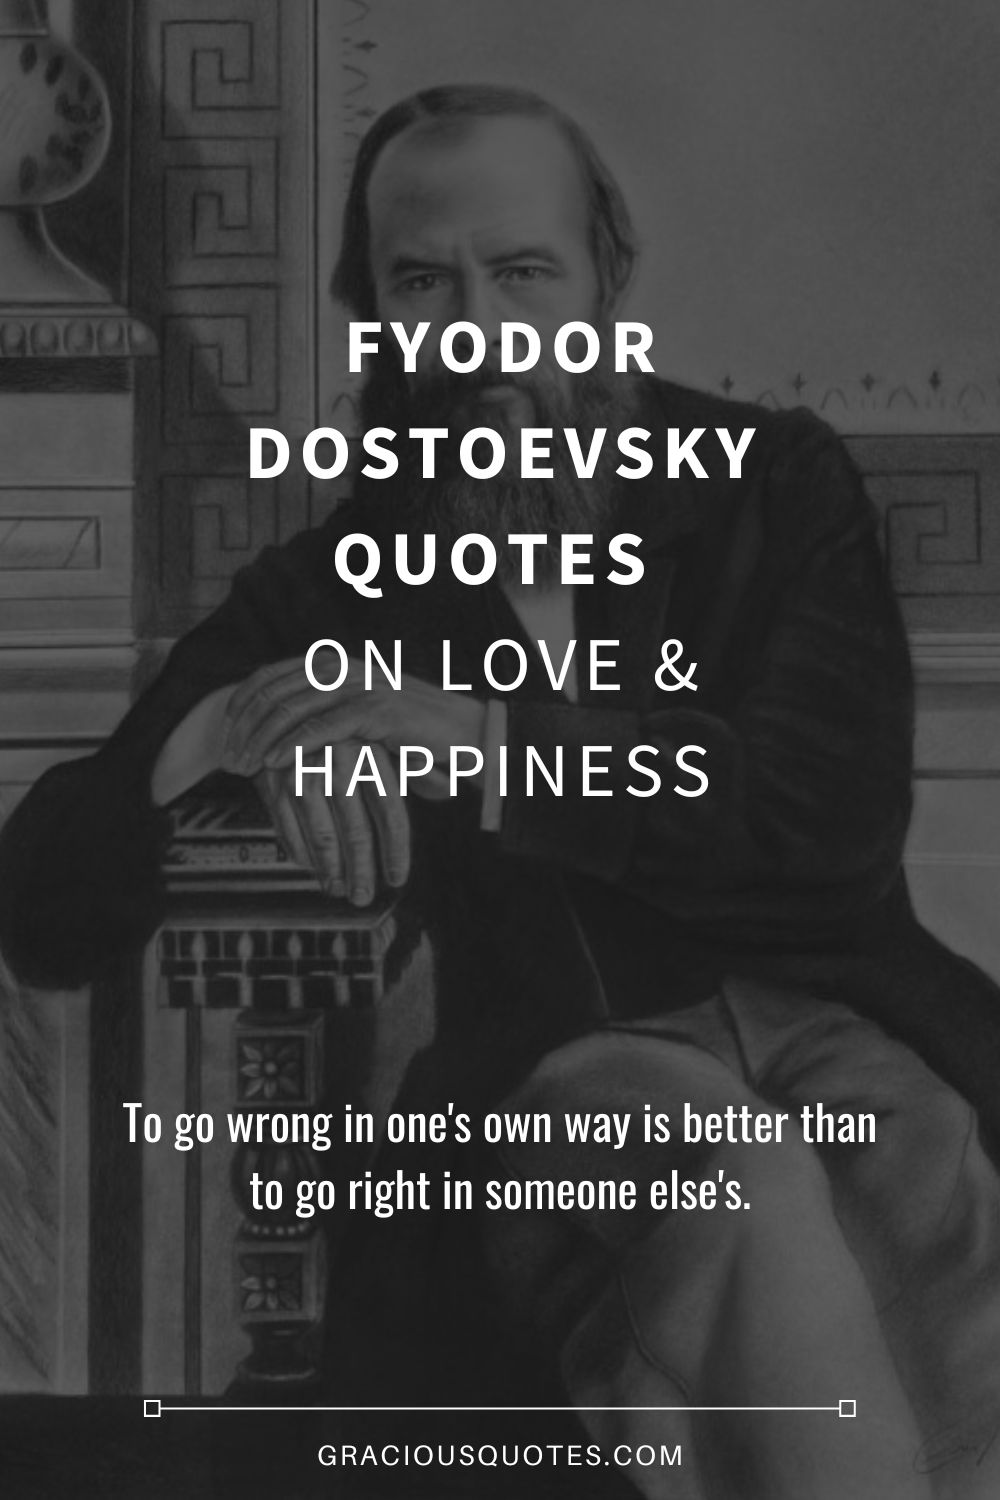 Fyodor Dostoevsky Quotes on Love & Happiness - Gracious Quotes